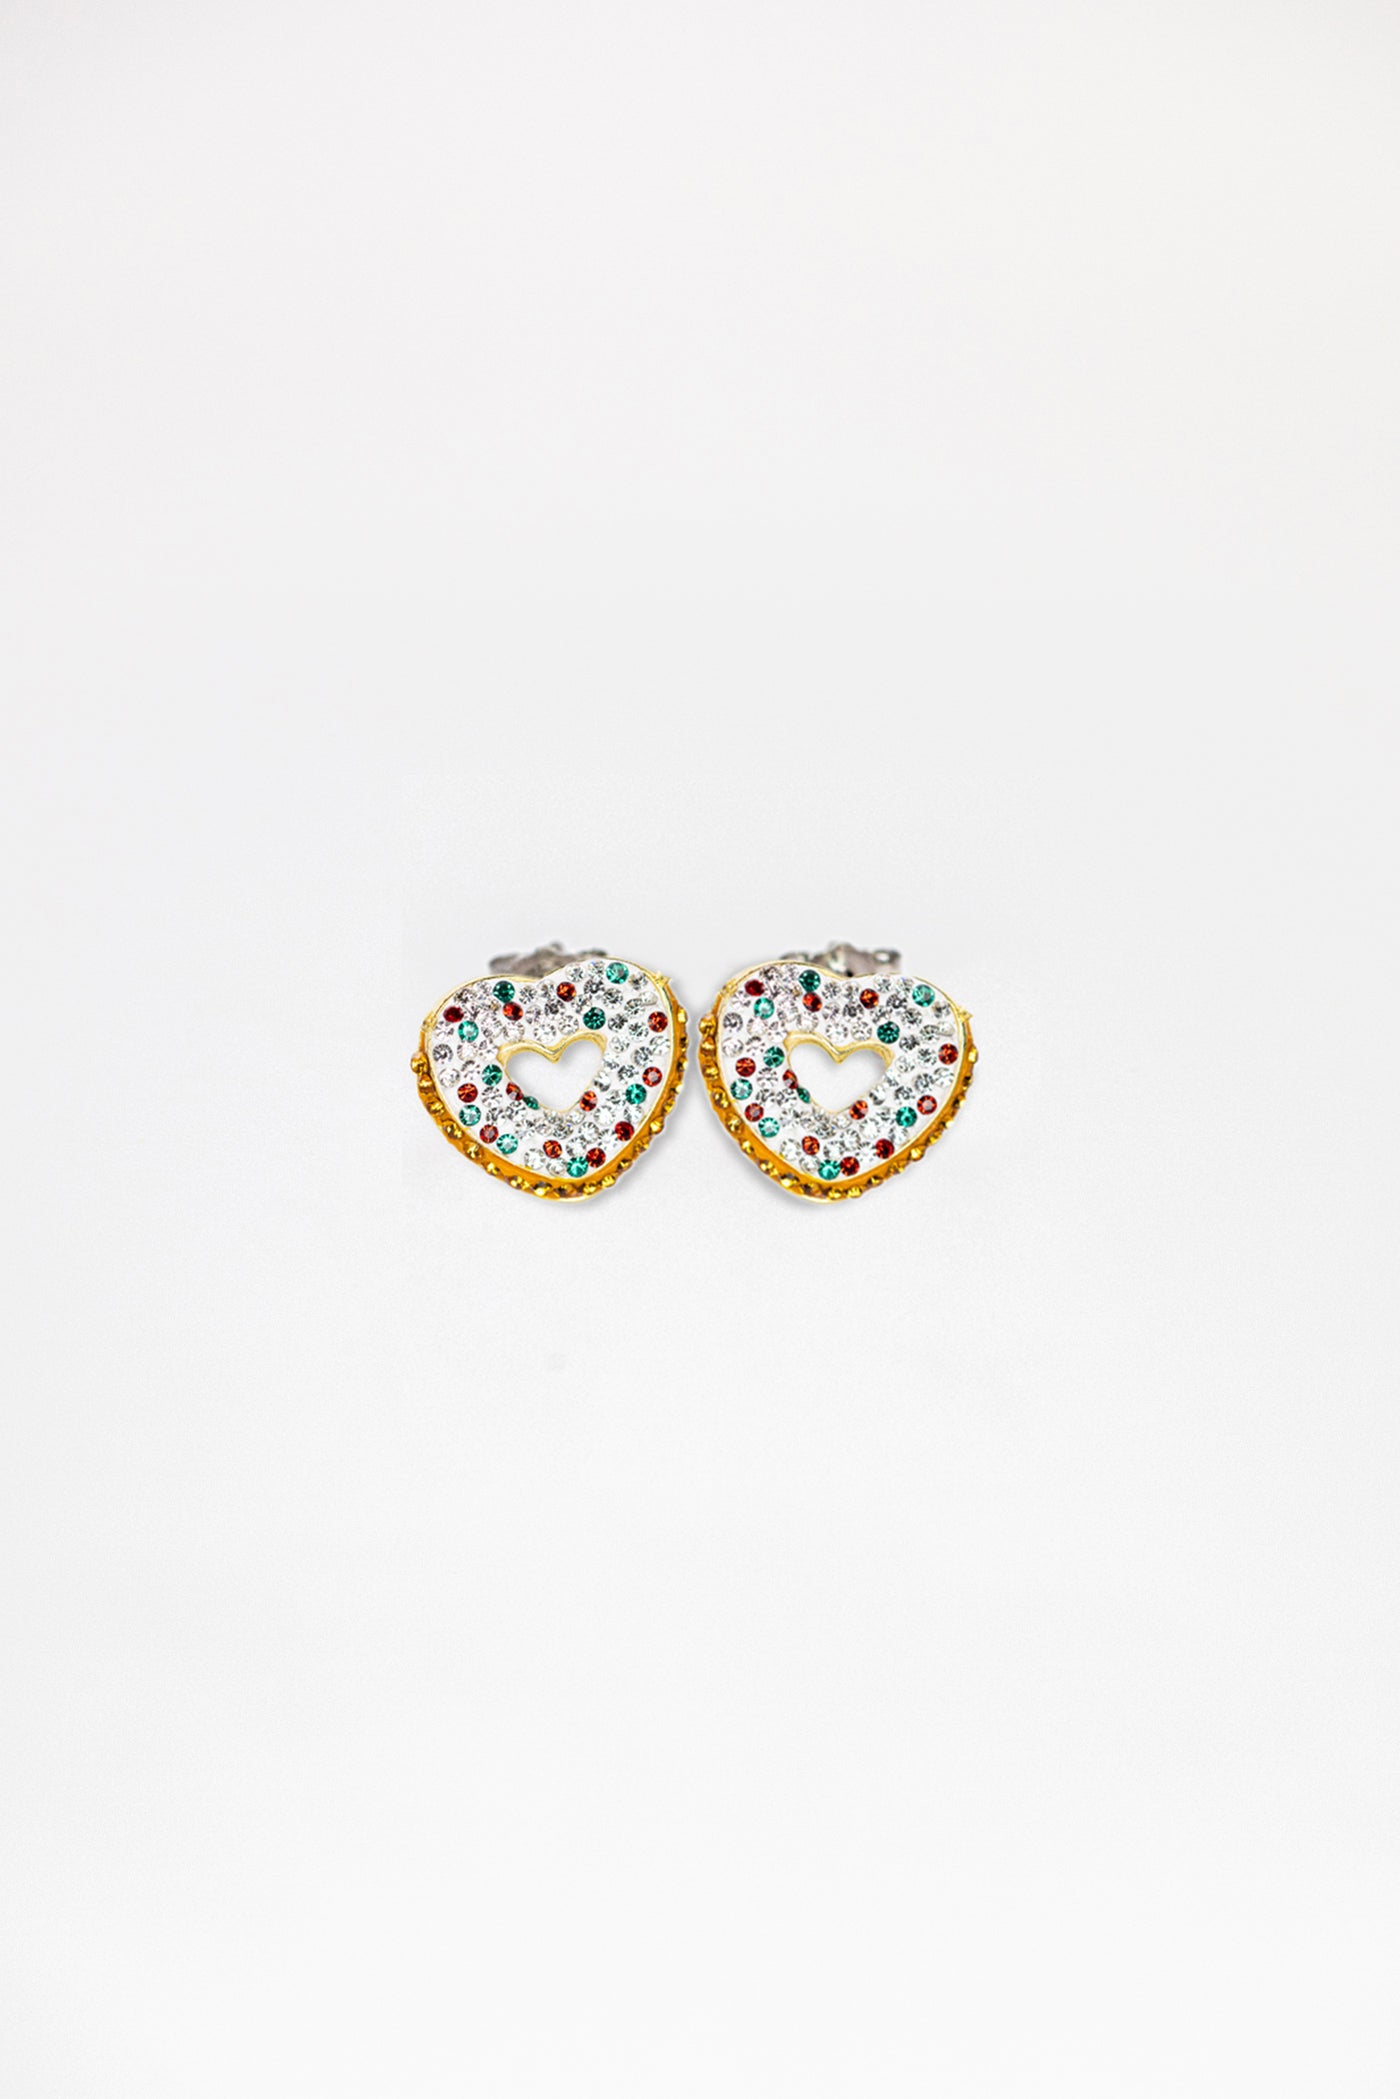 Heart Shaped Donut Gold Plated Crystal Stud Earrings